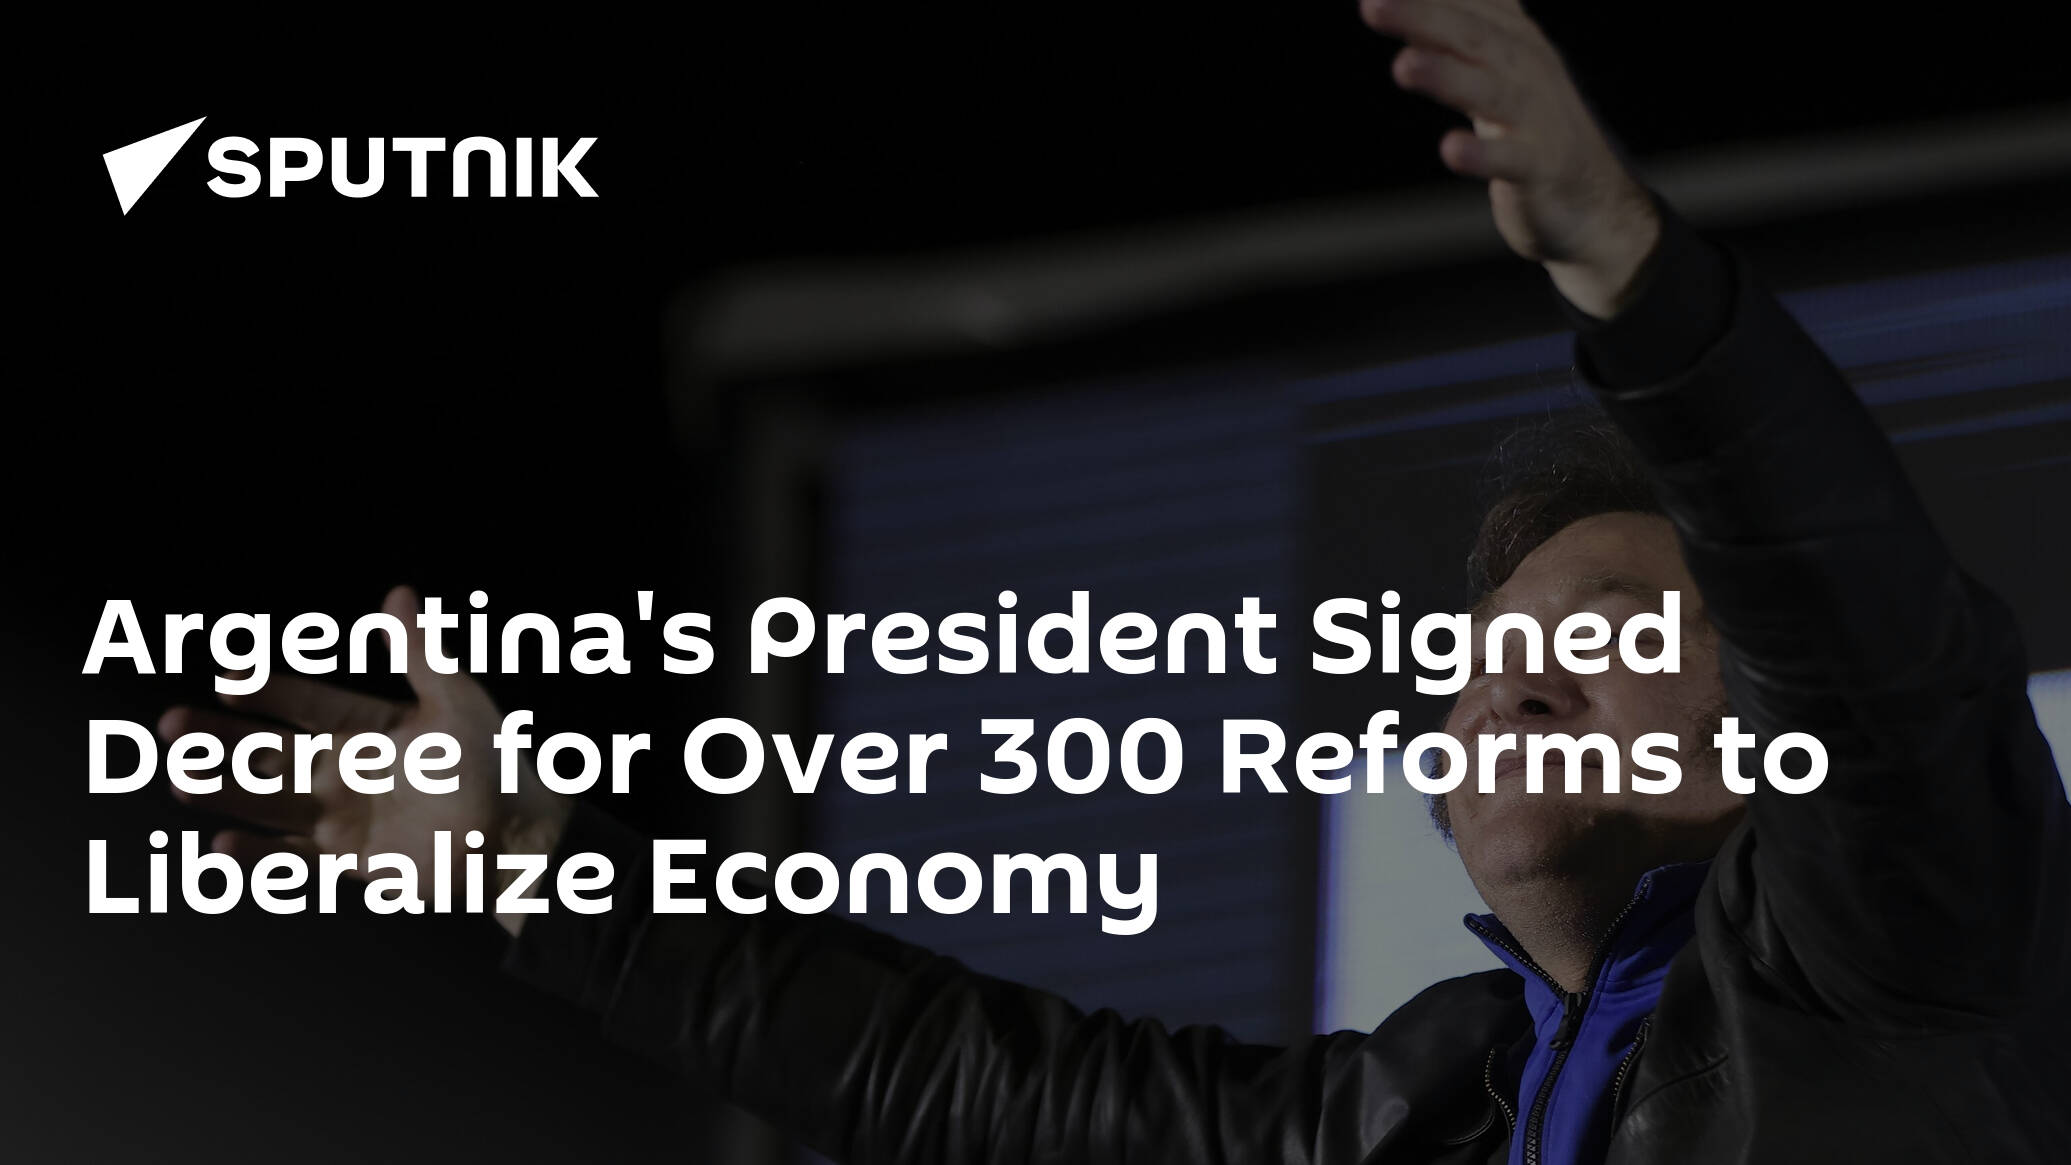 Argentina's President Signed Decree for Over 300 Reforms to Liberalize Economy